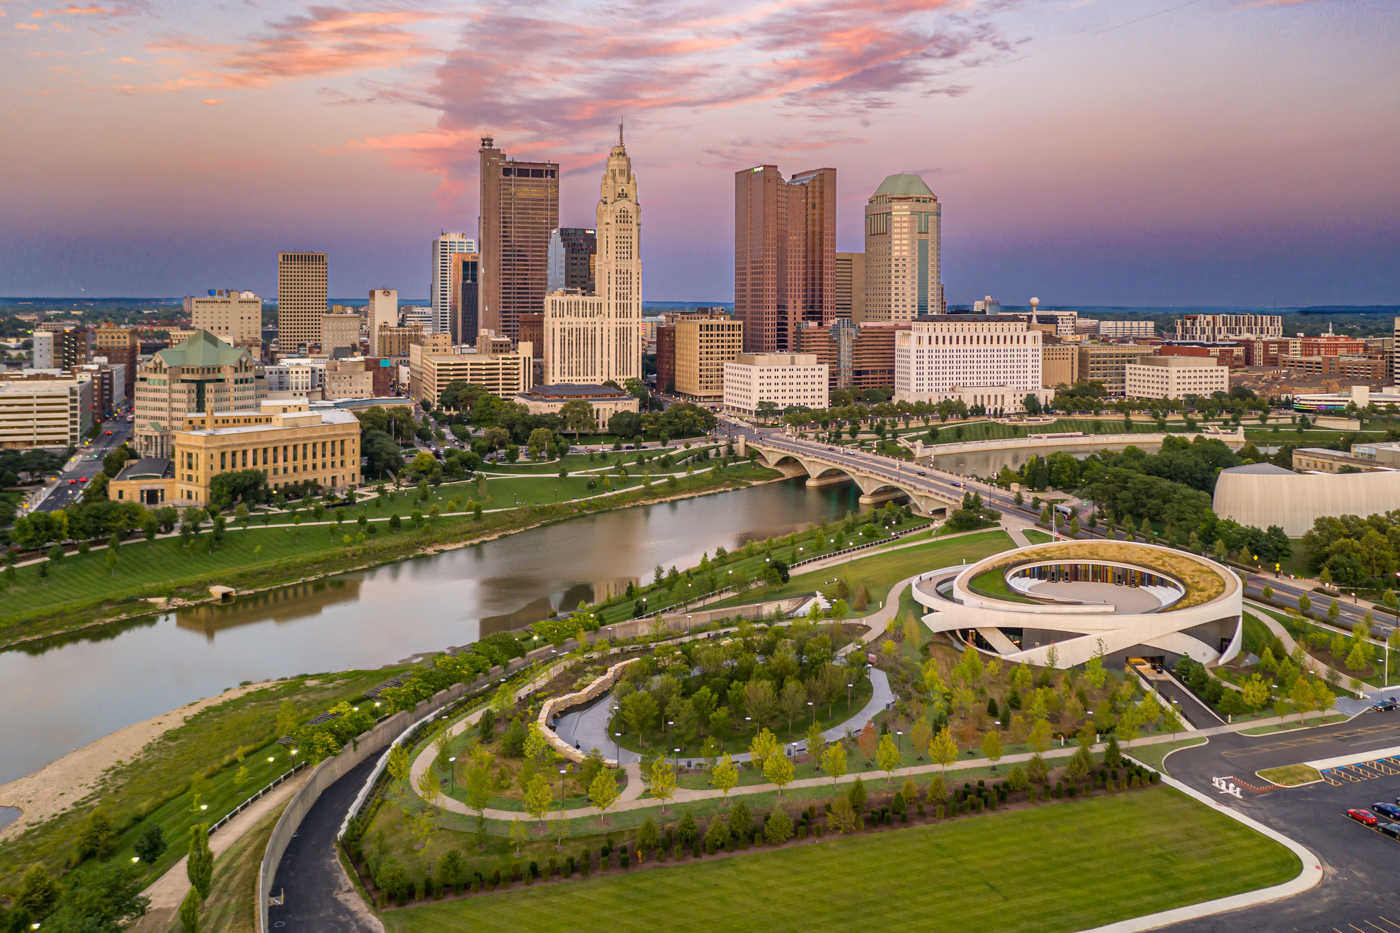 20 FANTASTIC THINGS TO DO IN COLUMBUS OHIO